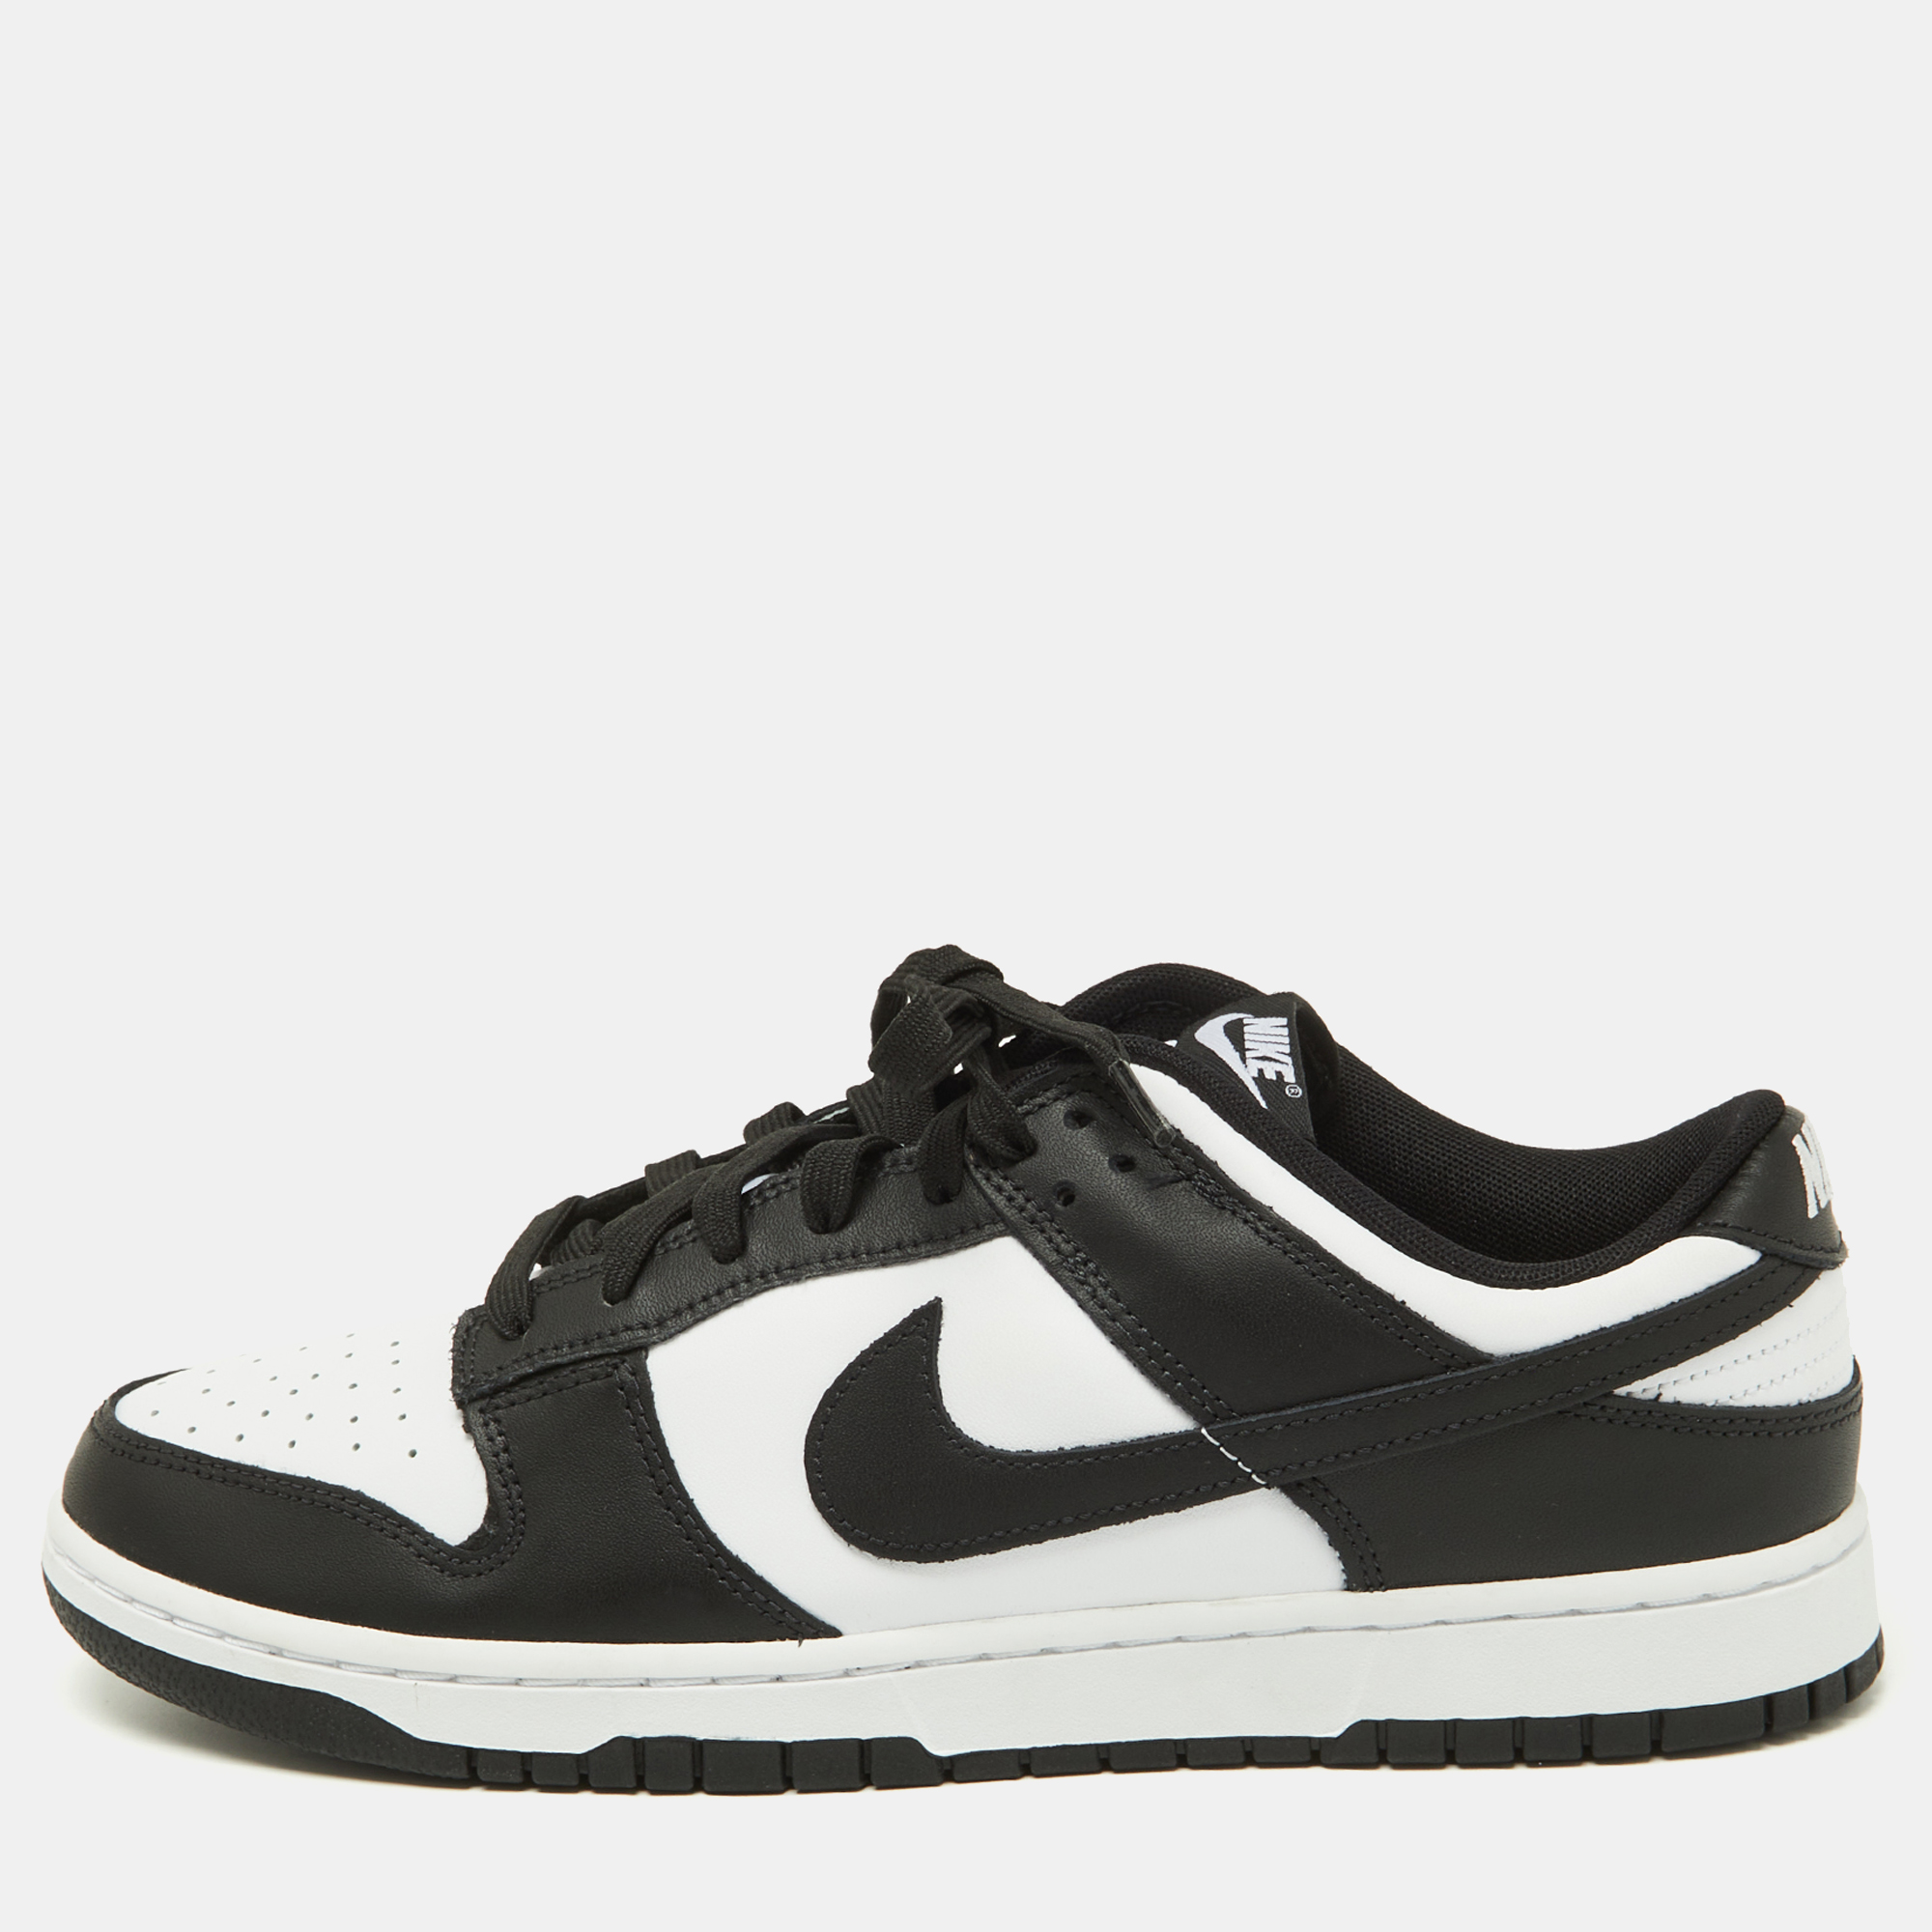 The Nike Dunk low top sneakers blend classic style with contemporary flair. Crafted from premium leather these sneakers exude sophistication and durability. The sleek black upper is complemented by crisp white accents offering a timeless aesthetic that effortlessly elevates any casual or sporty ensemble.